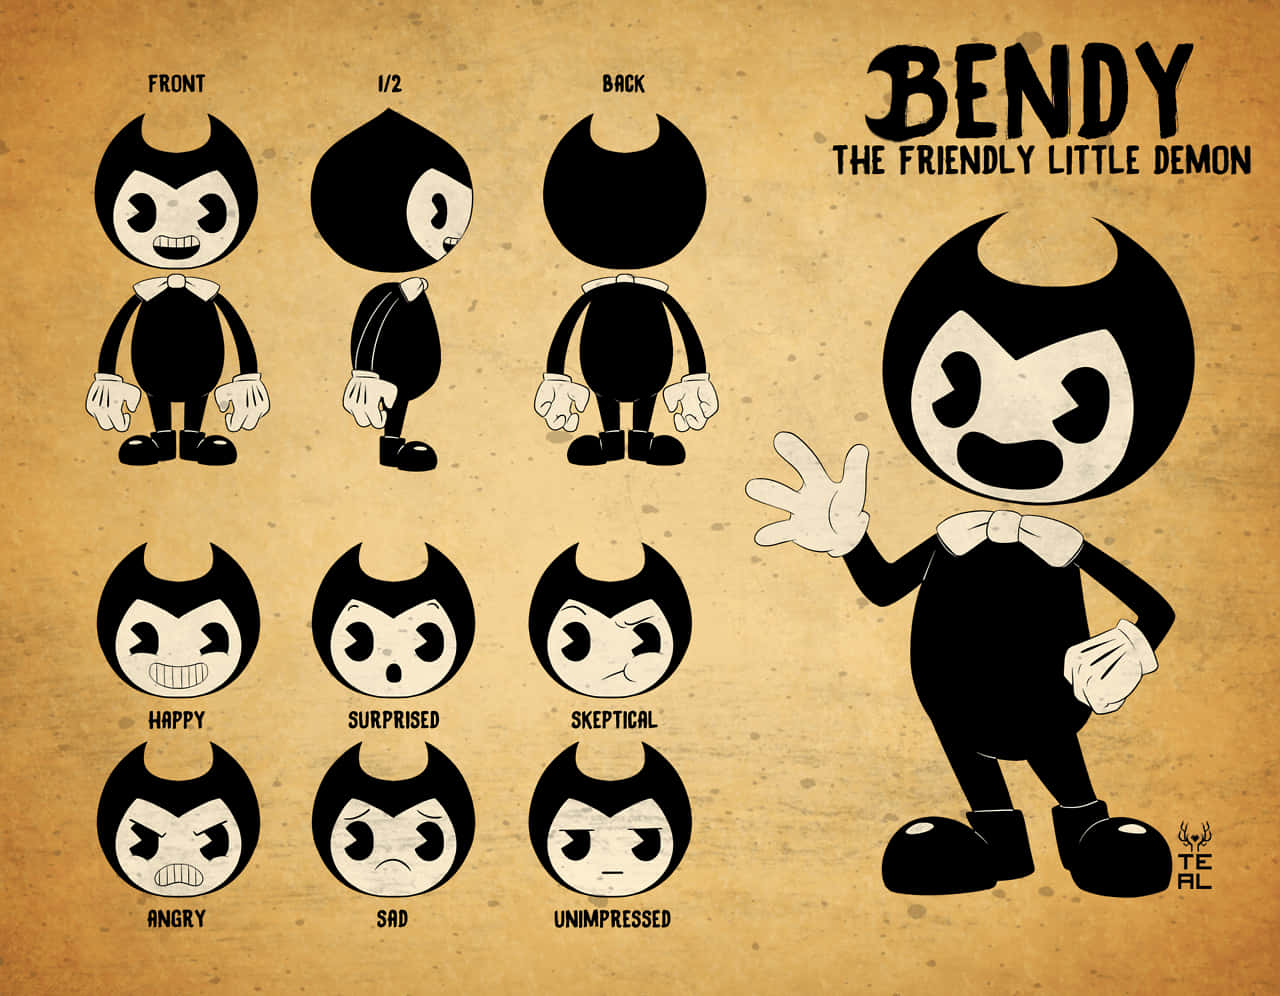 bendy and the ink machine song on Vimeo